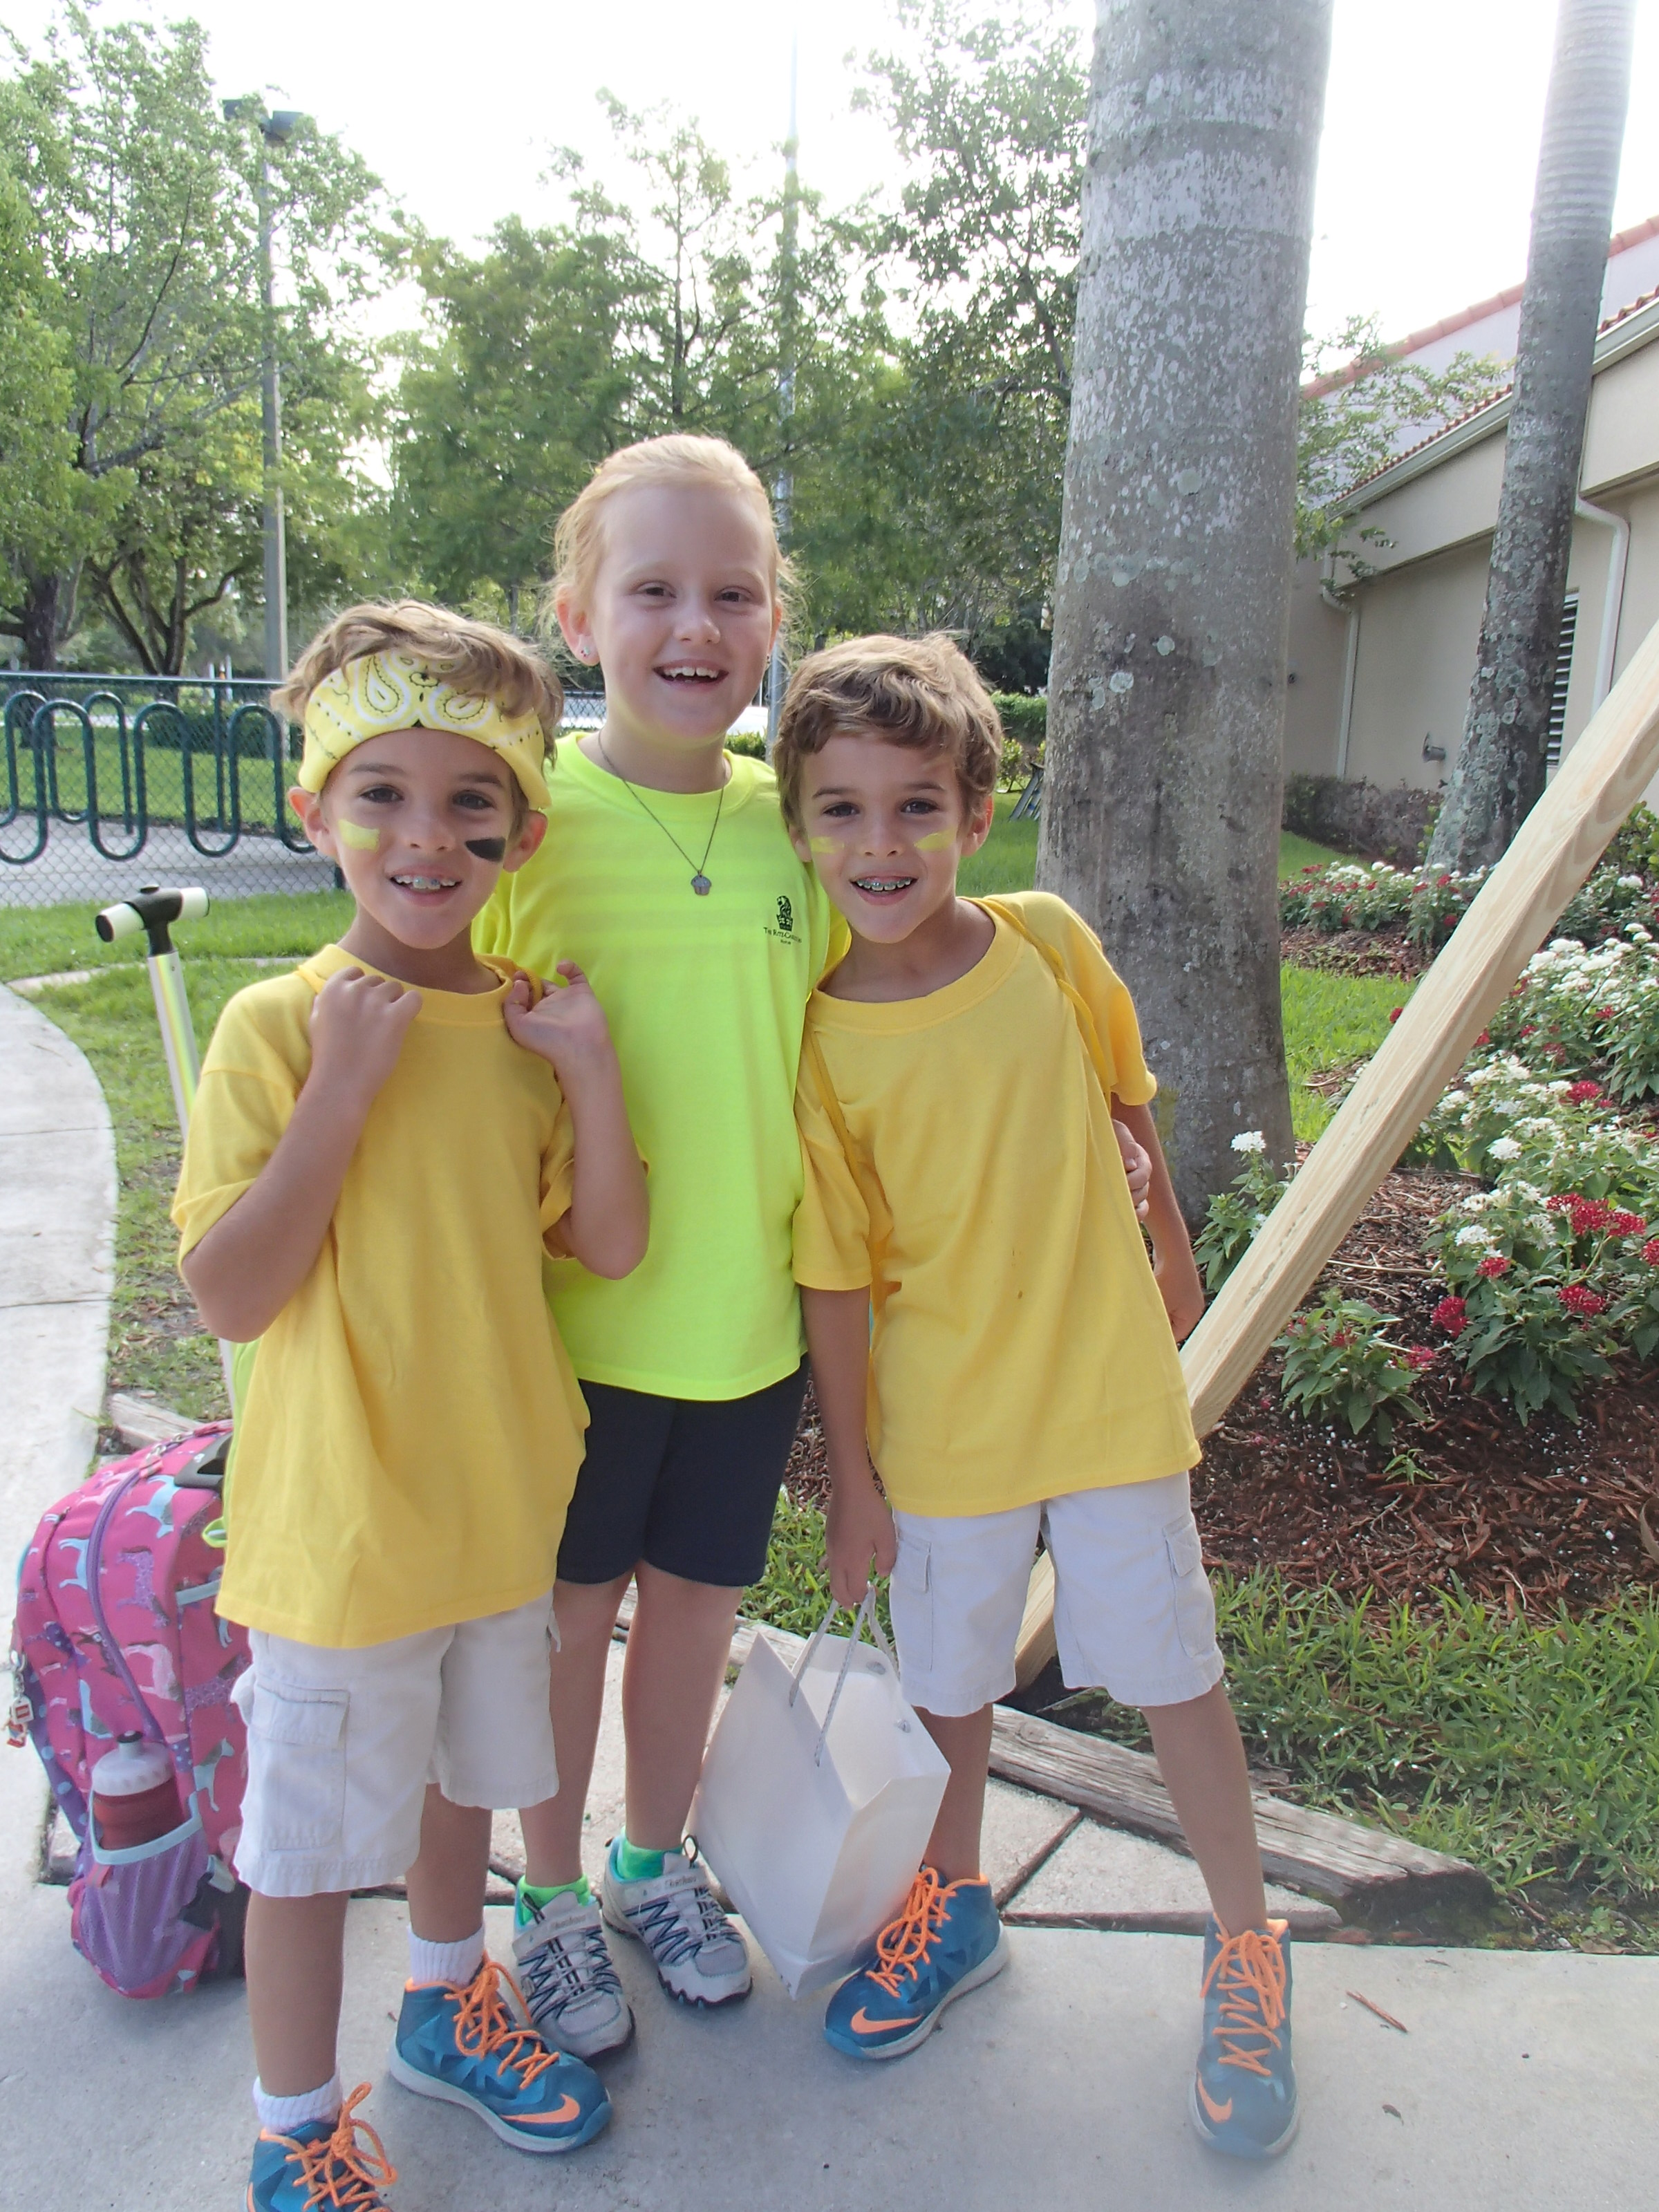 The yellow team arrives prepared to take on the red team during the Amazing Race Color War.